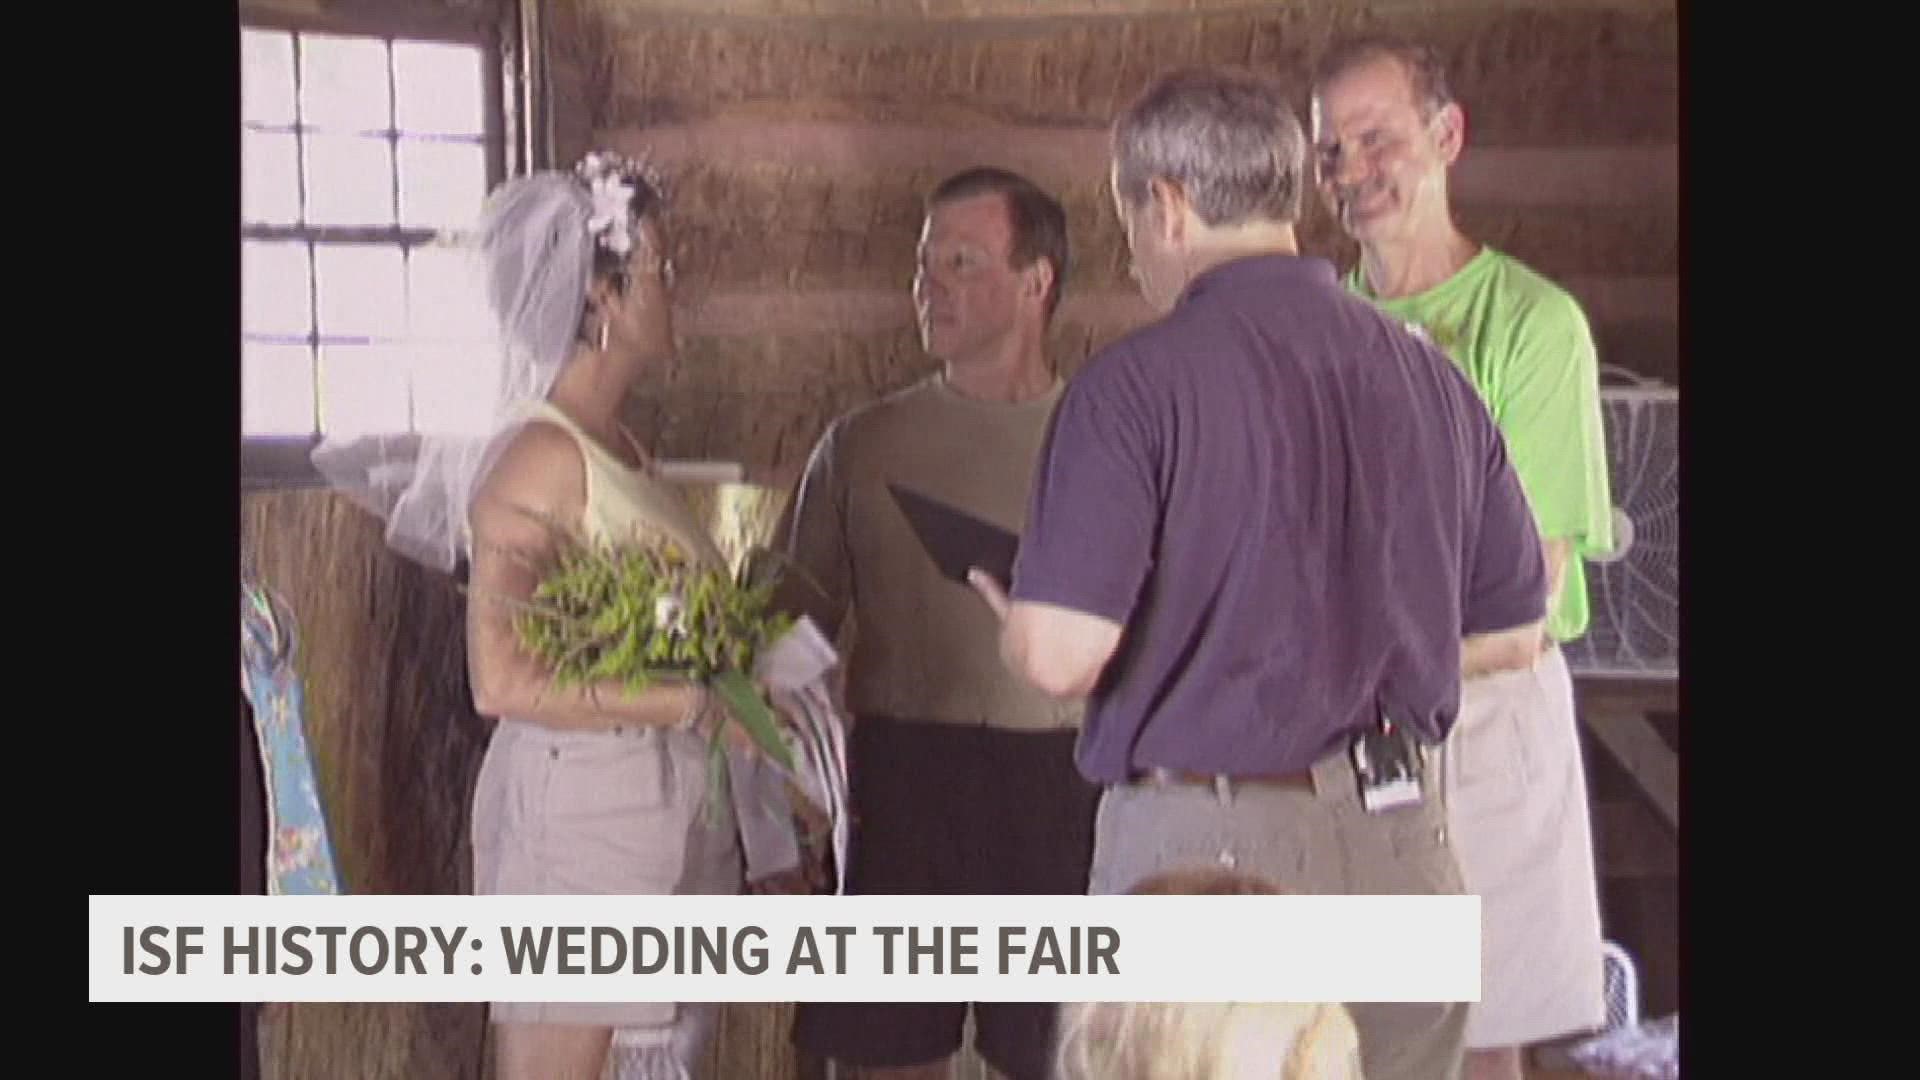 This lucky couple in love kept it simple - saying their vows inside a small building on the fairgrounds and celebrating their nuptials with a funnel cake.